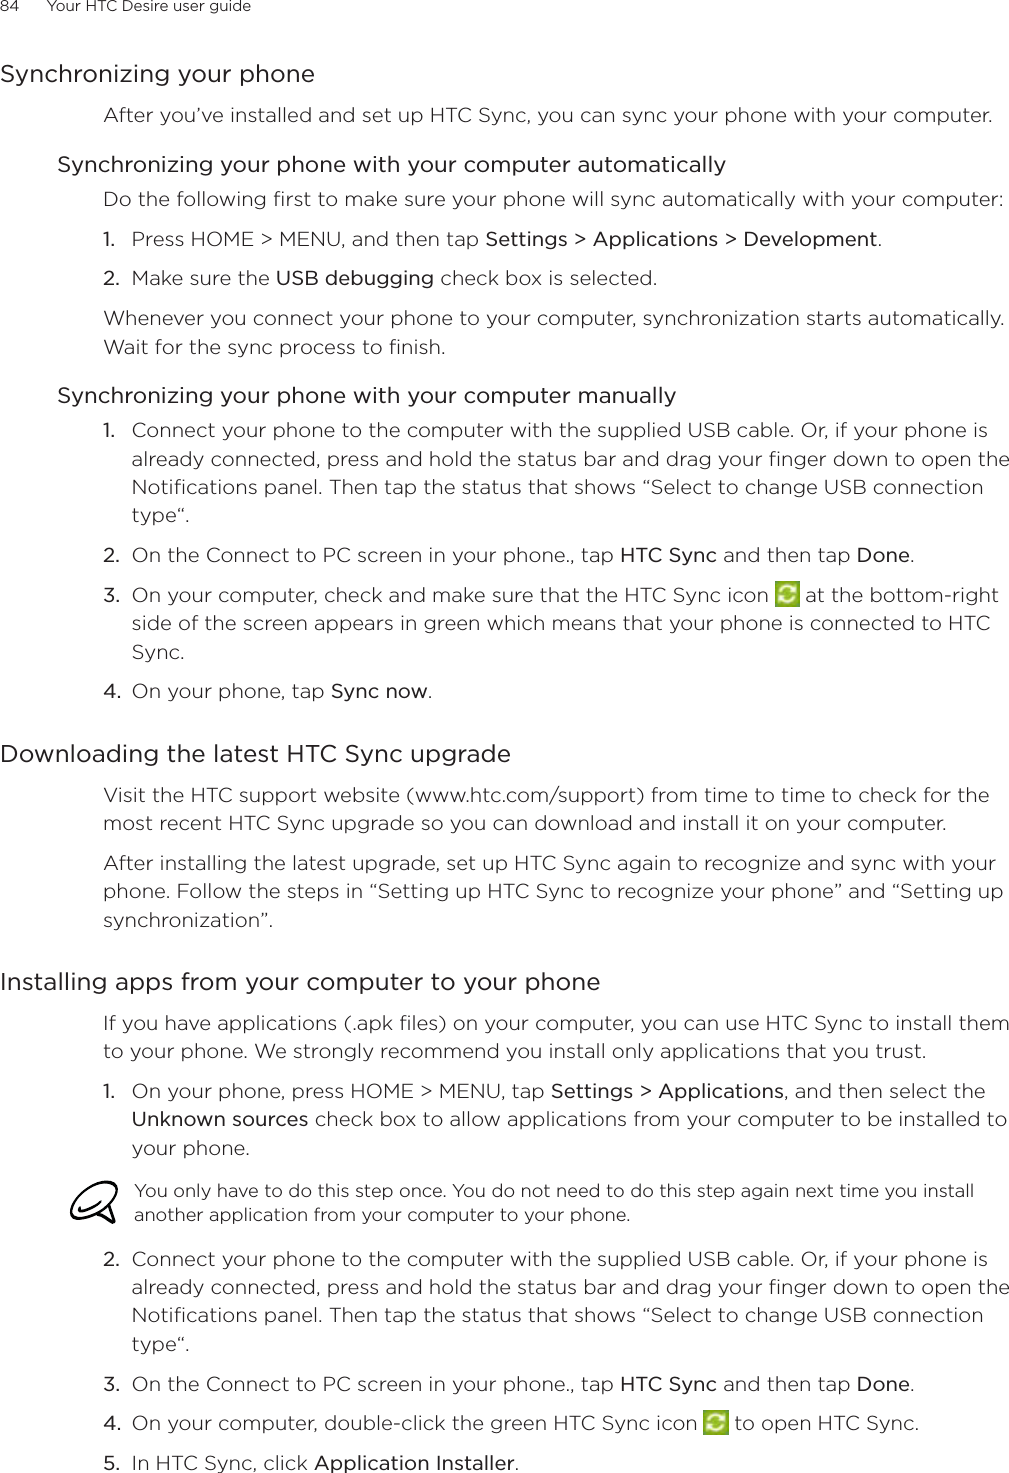 84      Your HTC Desire user guide      Synchronizing your phoneAfter you’ve installed and set up HTC Sync, you can sync your phone with your computer.Synchronizing your phone with your computer automaticallyDo the following first to make sure your phone will sync automatically with your computer:1. Press HOME &gt; MENU, and then tap Settings &gt; Applications &gt; Development.2. Make sure the USB debugging check box is selected.Whenever you connect your phone to your computer, synchronization starts automatically. Wait for the sync process to finish.Synchronizing your phone with your computer manuallyConnect your phone to the computer with the supplied USB cable. Or, if your phone is already connected, press and hold the status bar and drag your finger down to open the Notifications panel. Then tap the status that shows “Select to change USB connection type“.On the Connect to PC screen in your phone., tap HTC Sync and then tap Done.On your computer, check and make sure that the HTC Sync icon   at the bottom-right side of the screen appears in green which means that your phone is connected to HTC Sync. On your phone, tap Sync now.Downloading the latest HTC Sync upgradeVisit the HTC support website (www.htc.com/support) from time to time to check for the most recent HTC Sync upgrade so you can download and install it on your computer.After installing the latest upgrade, set up HTC Sync again to recognize and sync with your phone. Follow the steps in “Setting up HTC Sync to recognize your phone” and “Setting up synchronization”. Installing apps from your computer to your phoneIf you have applications (.apk files) on your computer, you can use HTC Sync to install them to your phone. We strongly recommend you install only applications that you trust.1. On your phone, press HOME &gt; MENU, tap Settings &gt; Applications, and then select the Unknown sources check box to allow applications from your computer to be installed to your phone.You only have to do this step once. You do not need to do this step again next time you install another application from your computer to your phone.2. Connect your phone to the computer with the supplied USB cable. Or, if your phone is already connected, press and hold the status bar and drag your finger down to open the Notifications panel. Then tap the status that shows “Select to change USB connection type“.3. On the Connect to PC screen in your phone., tap HTC Sync and then tap Done.4. On your computer, double-click the green HTC Sync icon   to open HTC Sync.5. In HTC Sync, click Application Installer.1.2.3.4.